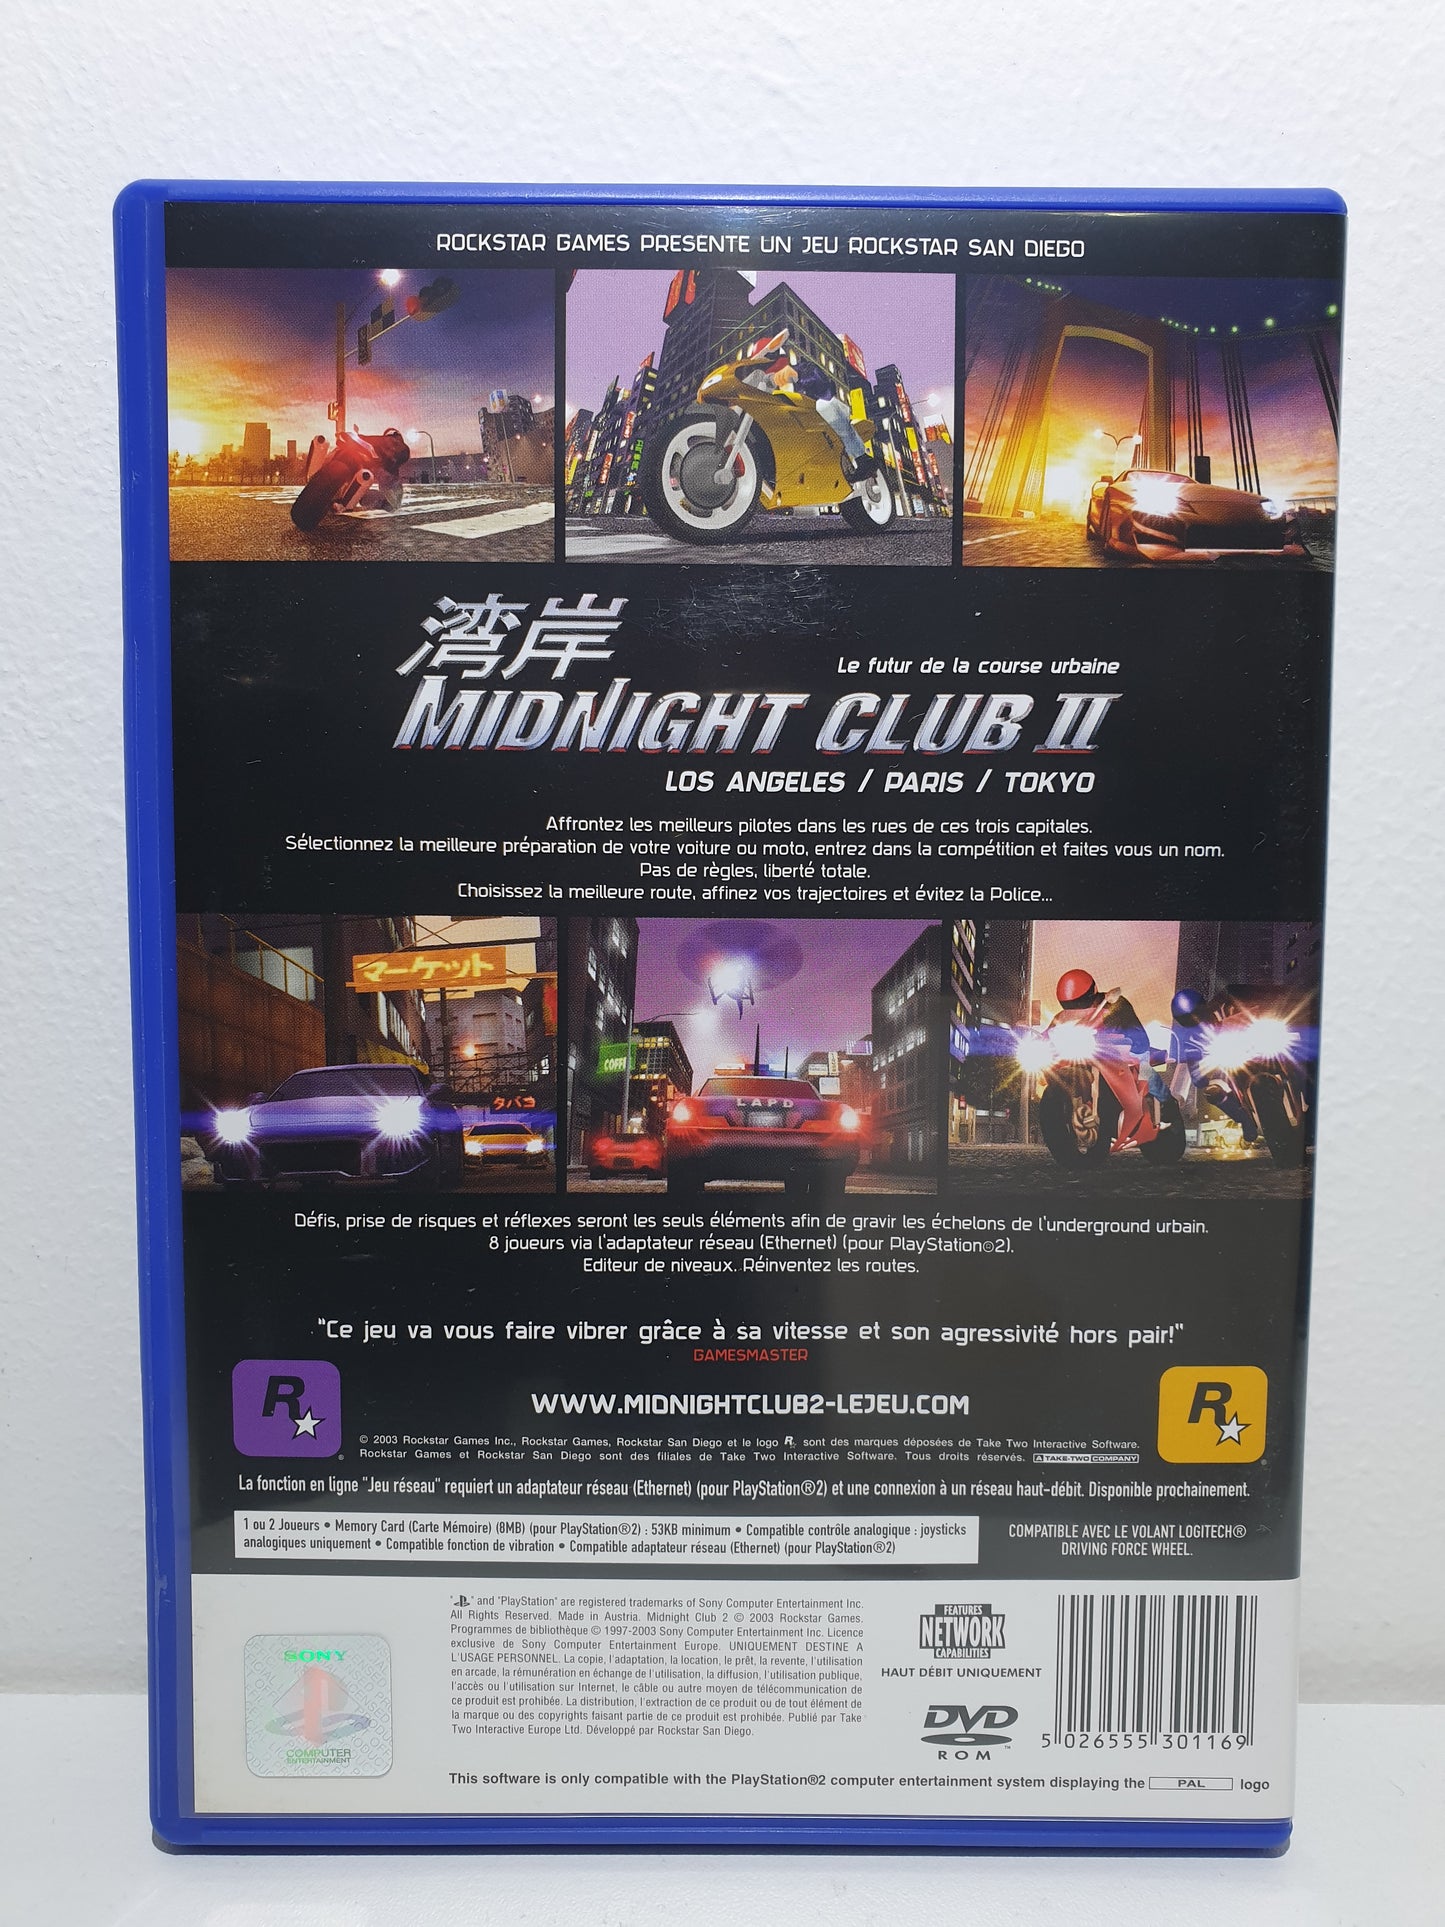 Midnight Club II PS2 - Occasion excellent état